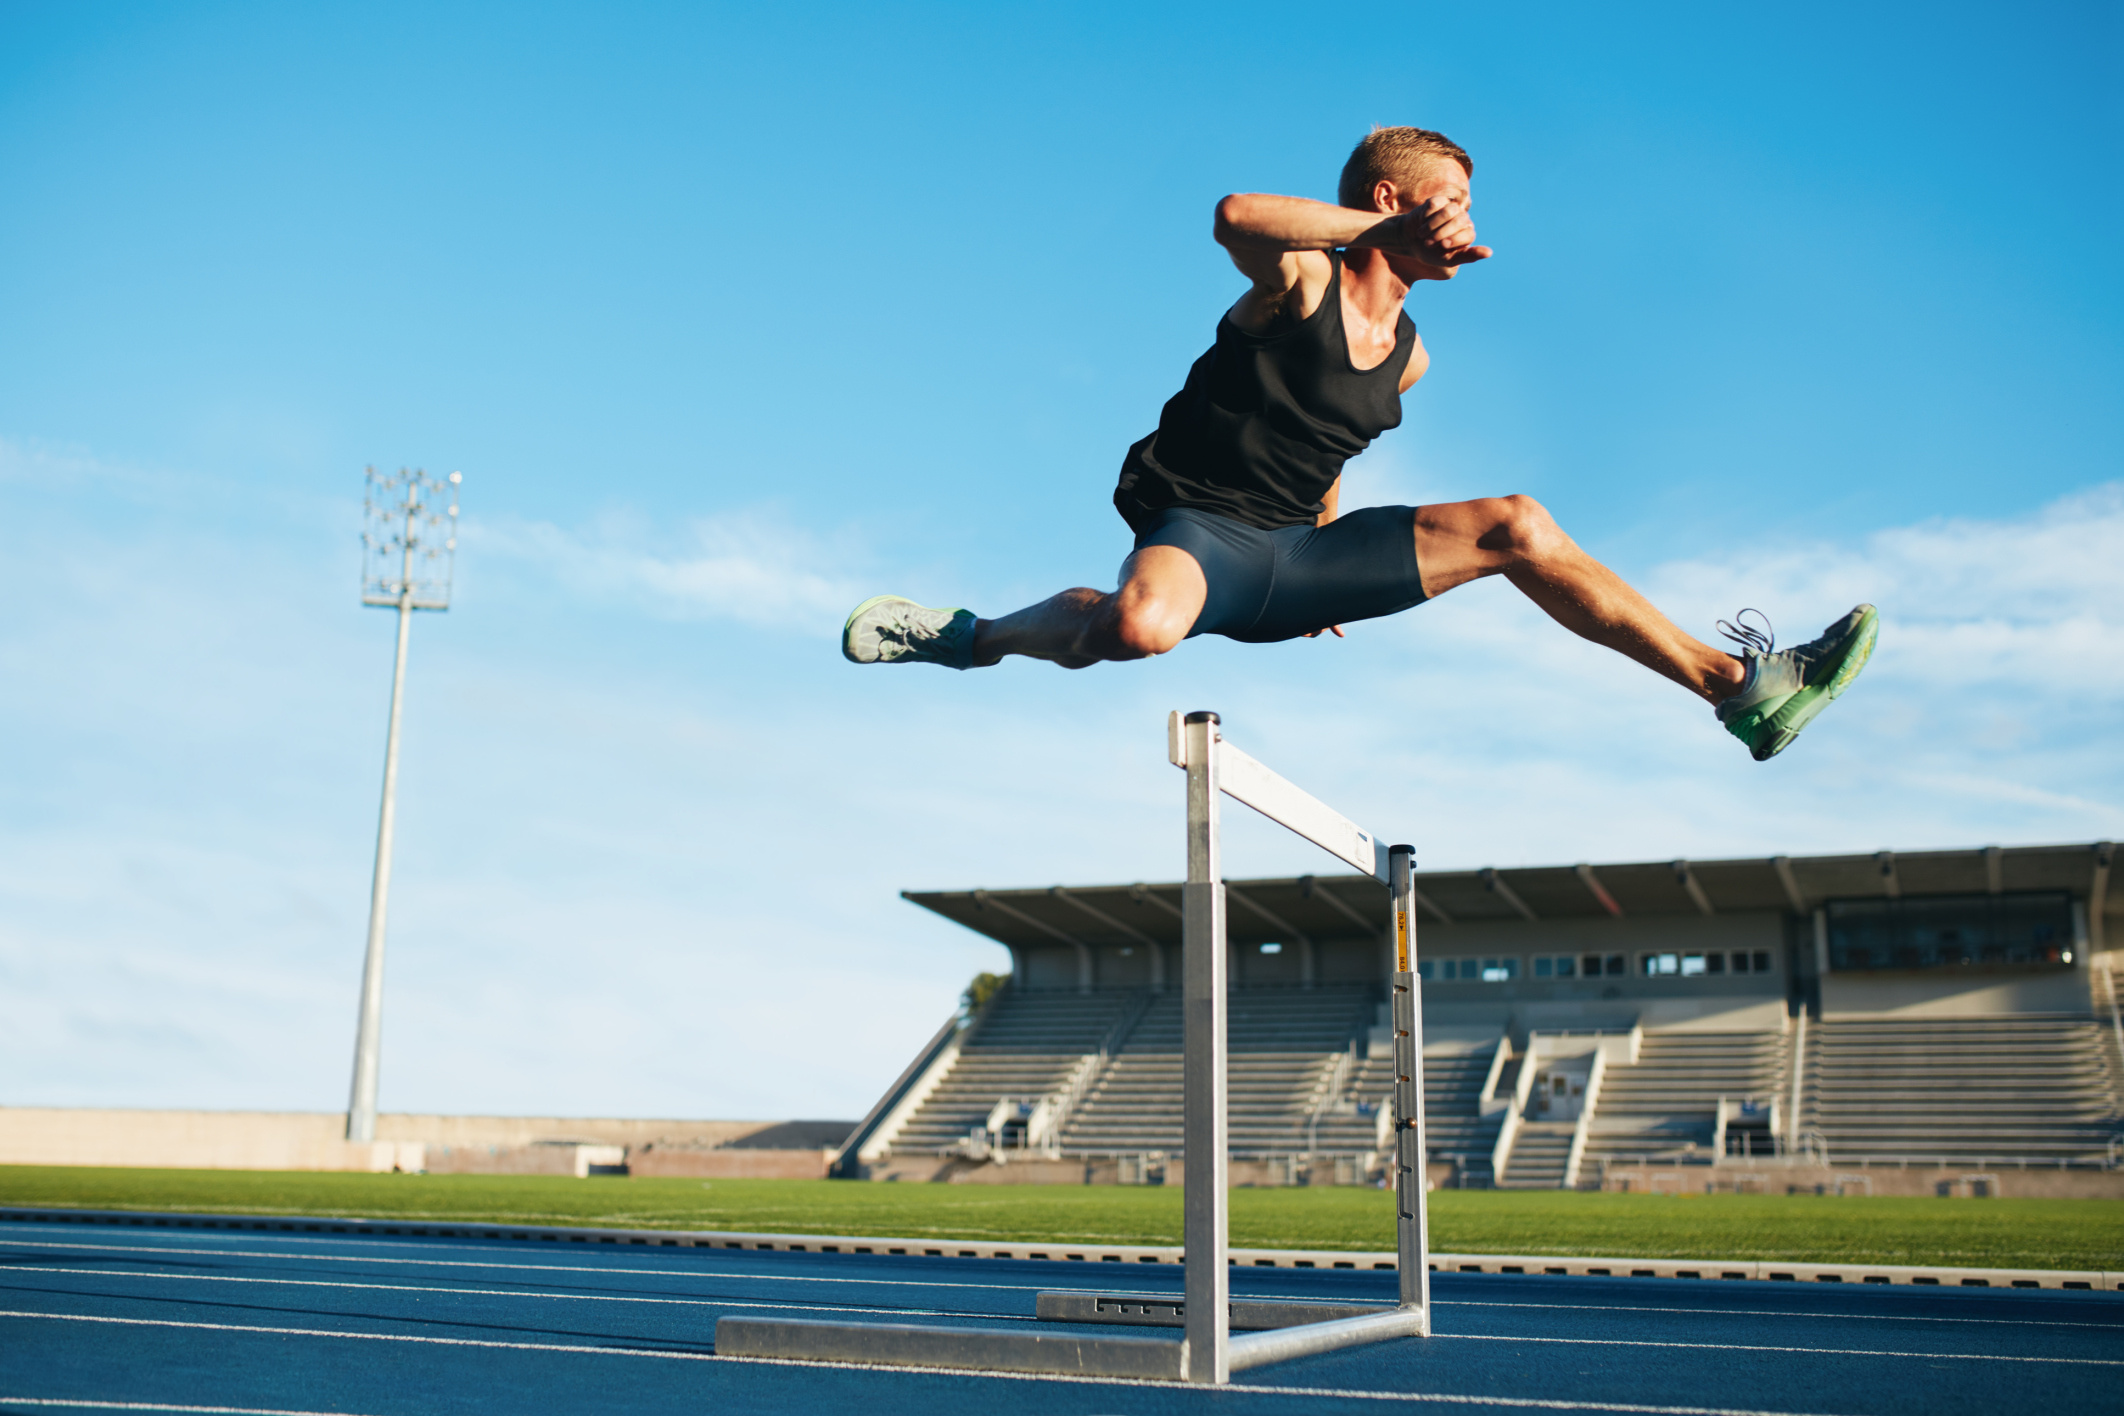 Jumping: Hurdling, Racing over hurdles, Running over an obstacle in a sprint. 2130x1420 HD Background.